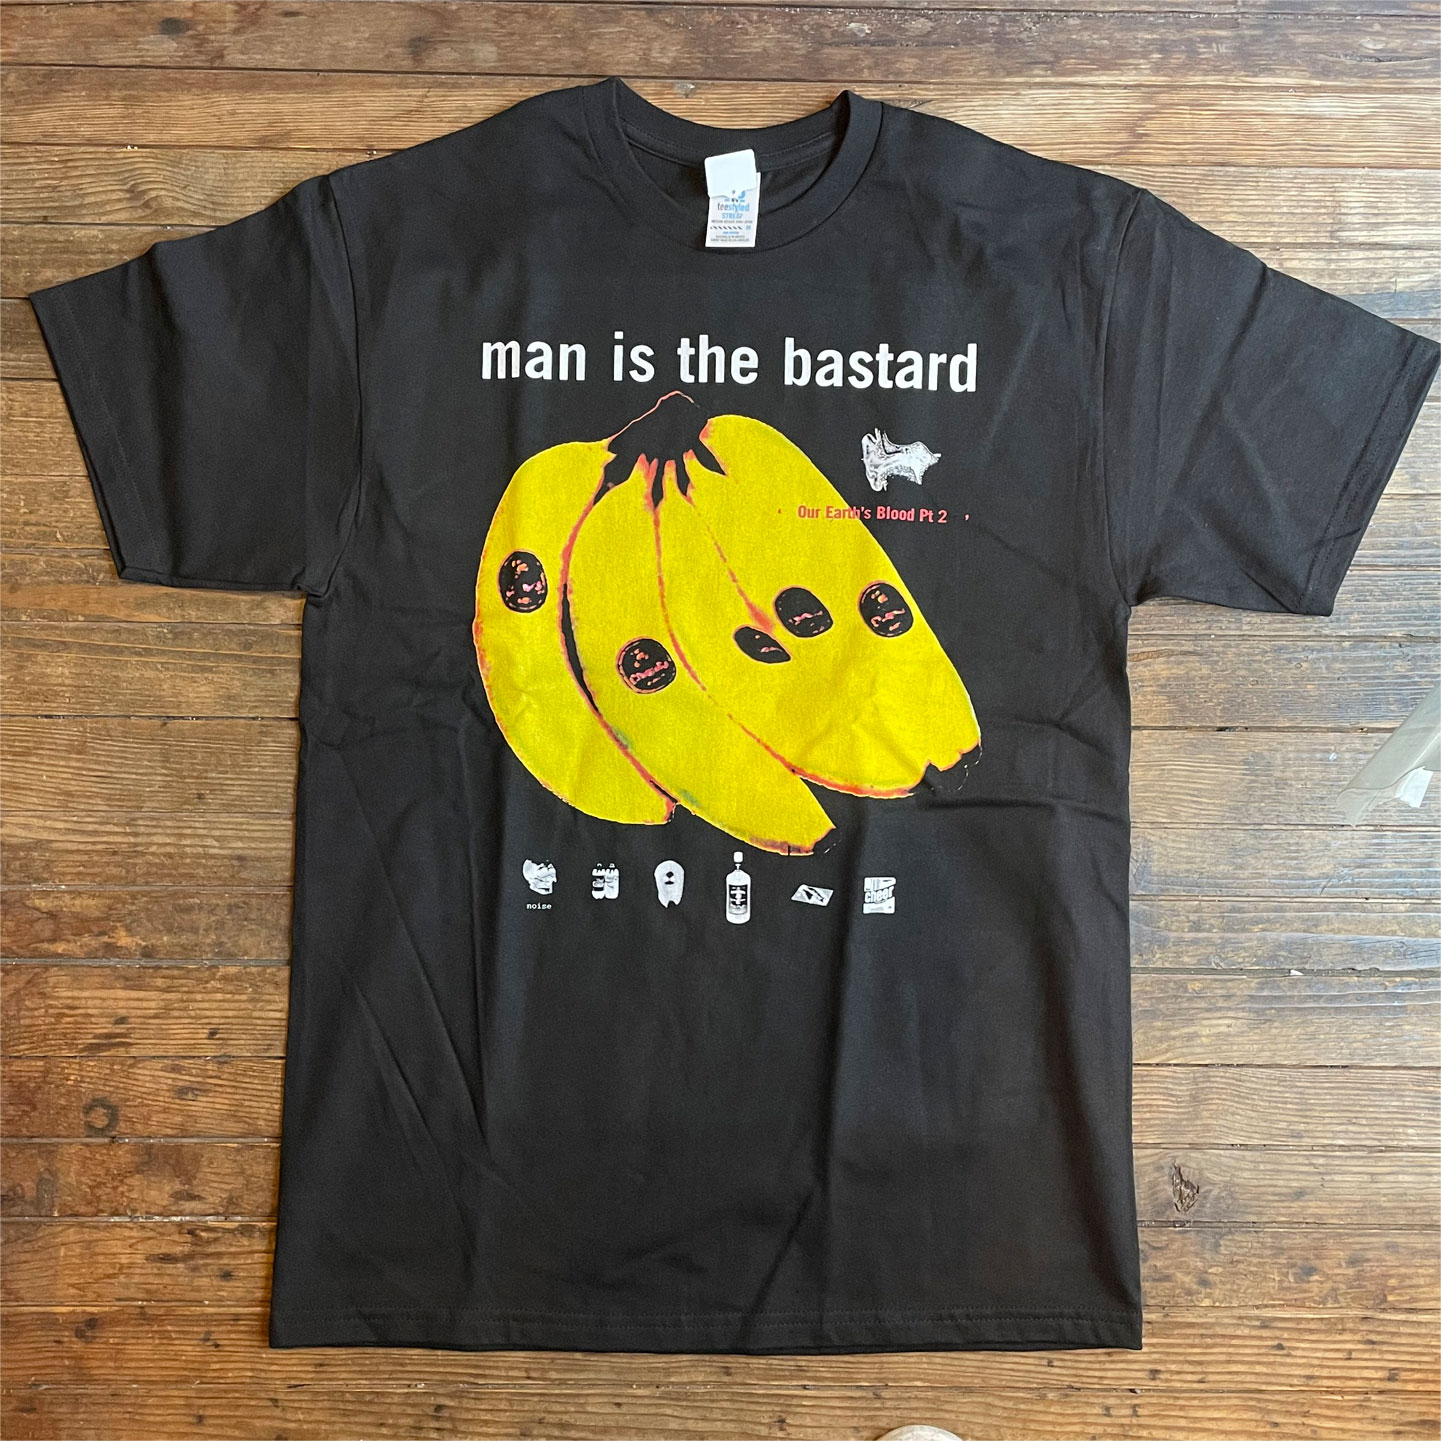 MAN IS THE BASTARD Tシャツ Our Earth's Blood Pt 2 オフィシャル